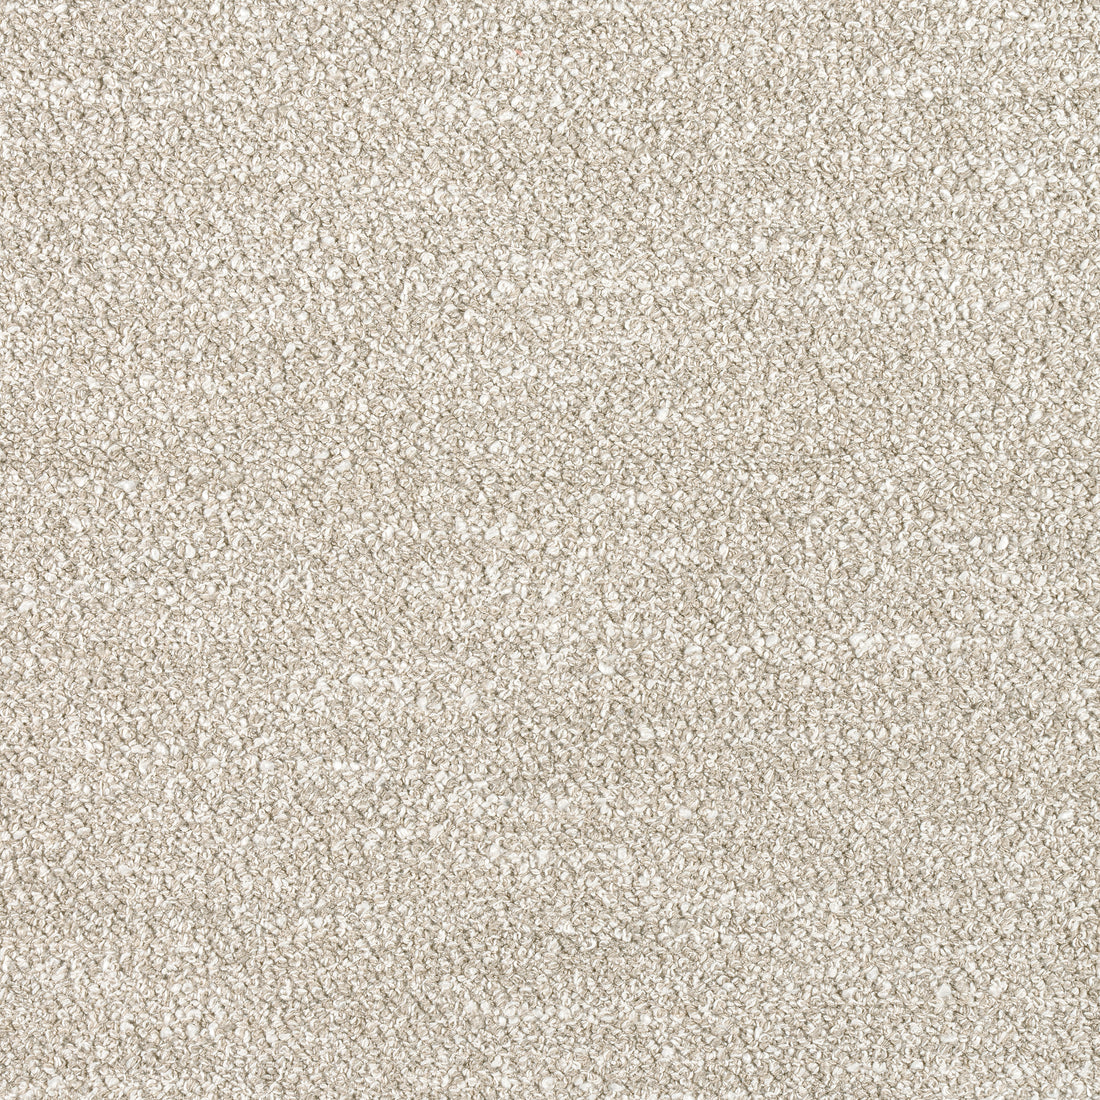 Capra fabric in flax color - pattern number W8586 - by Thibaut in the Villa Textures collection